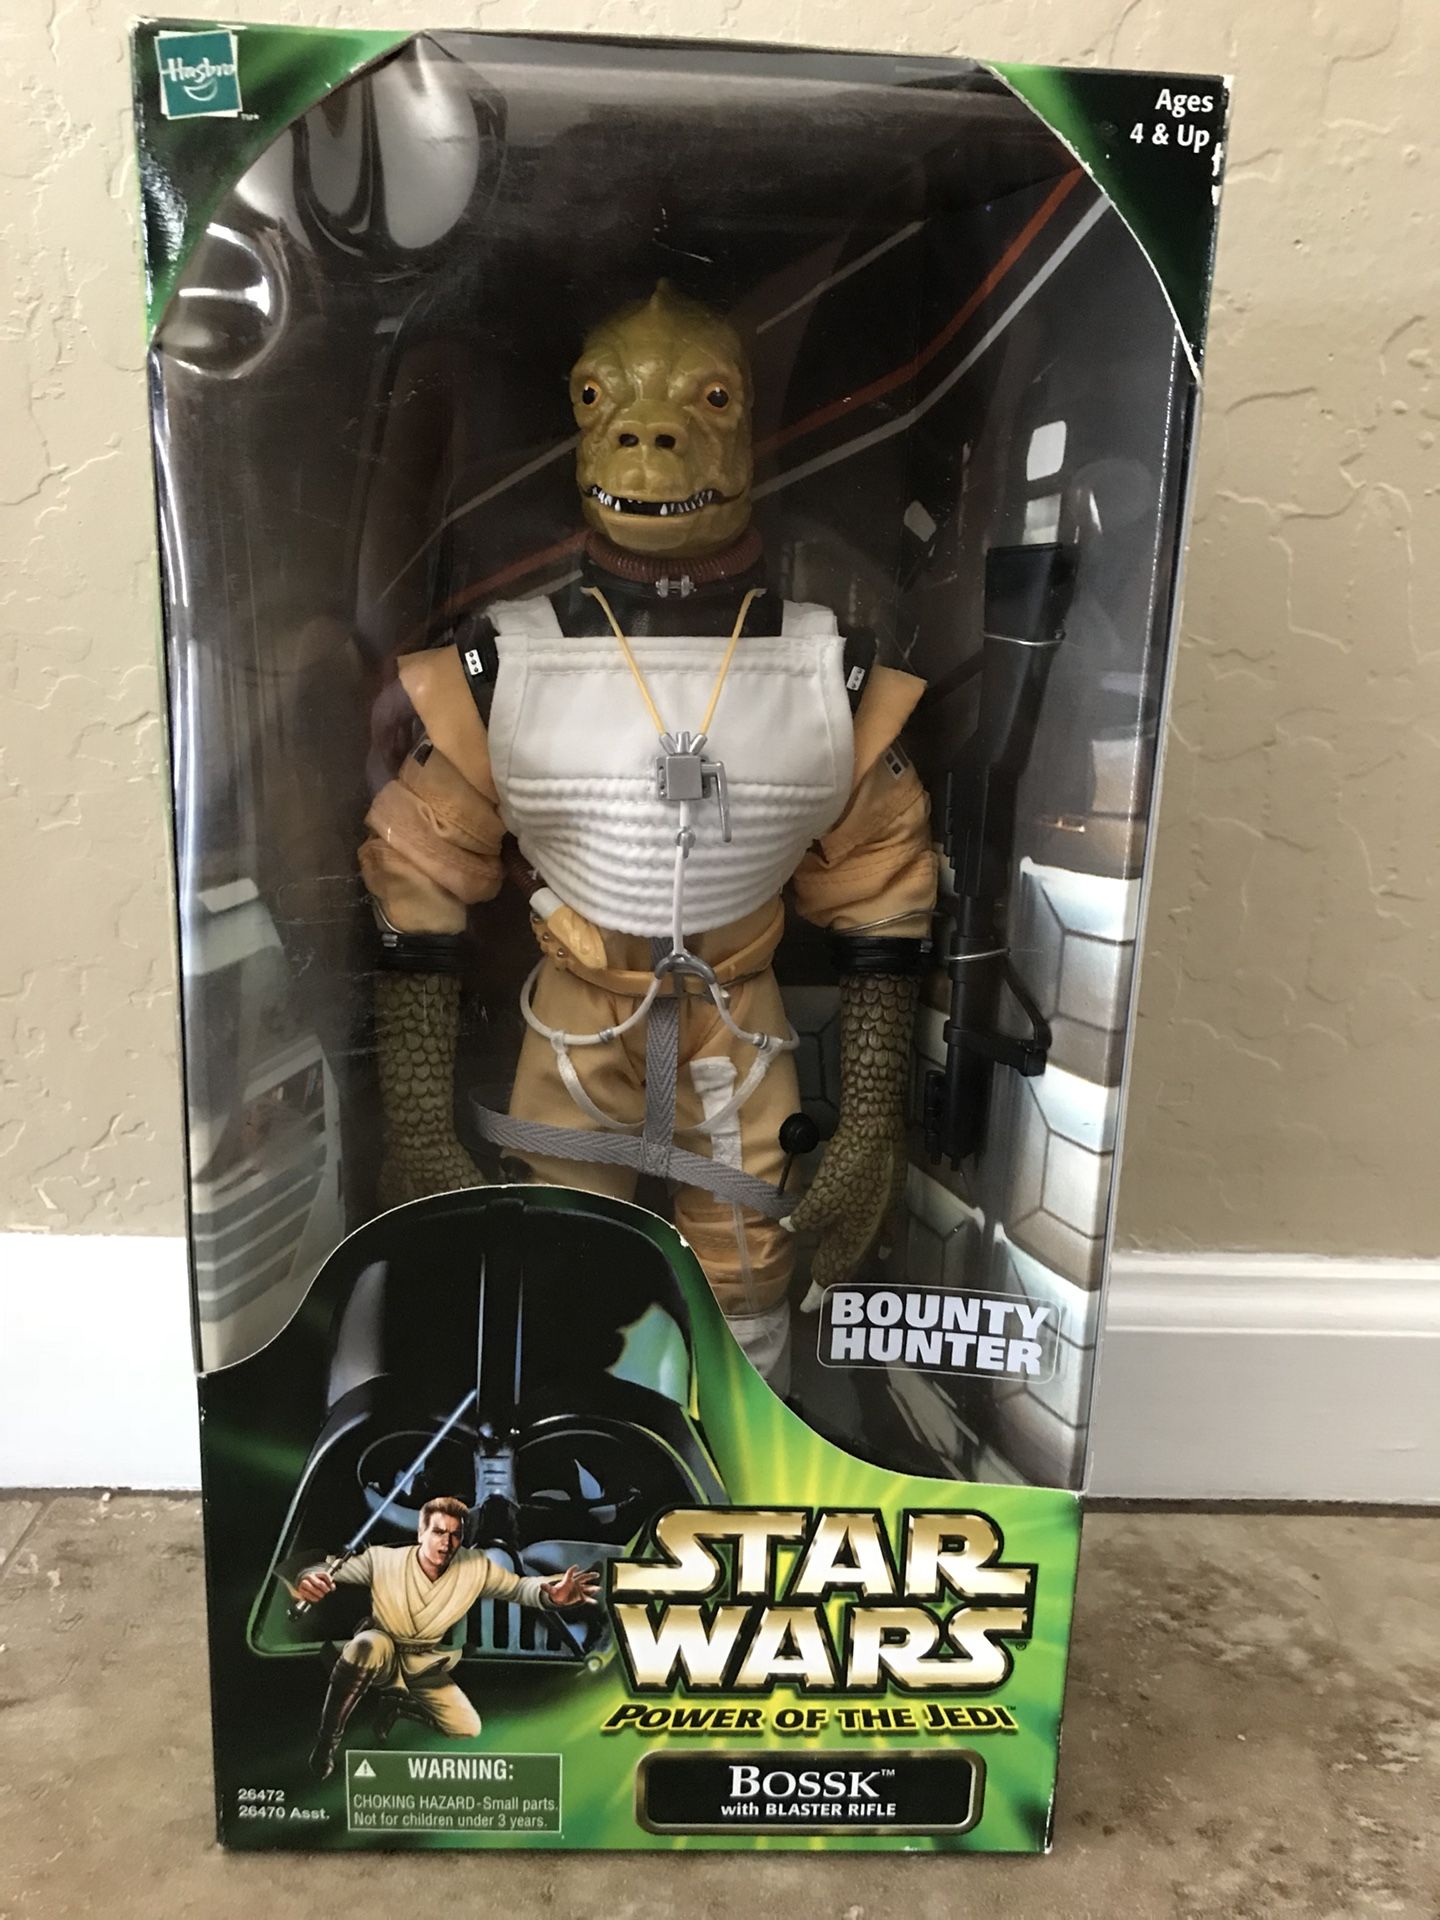 Collectible Star Wars action figure Bosk bounty hunter